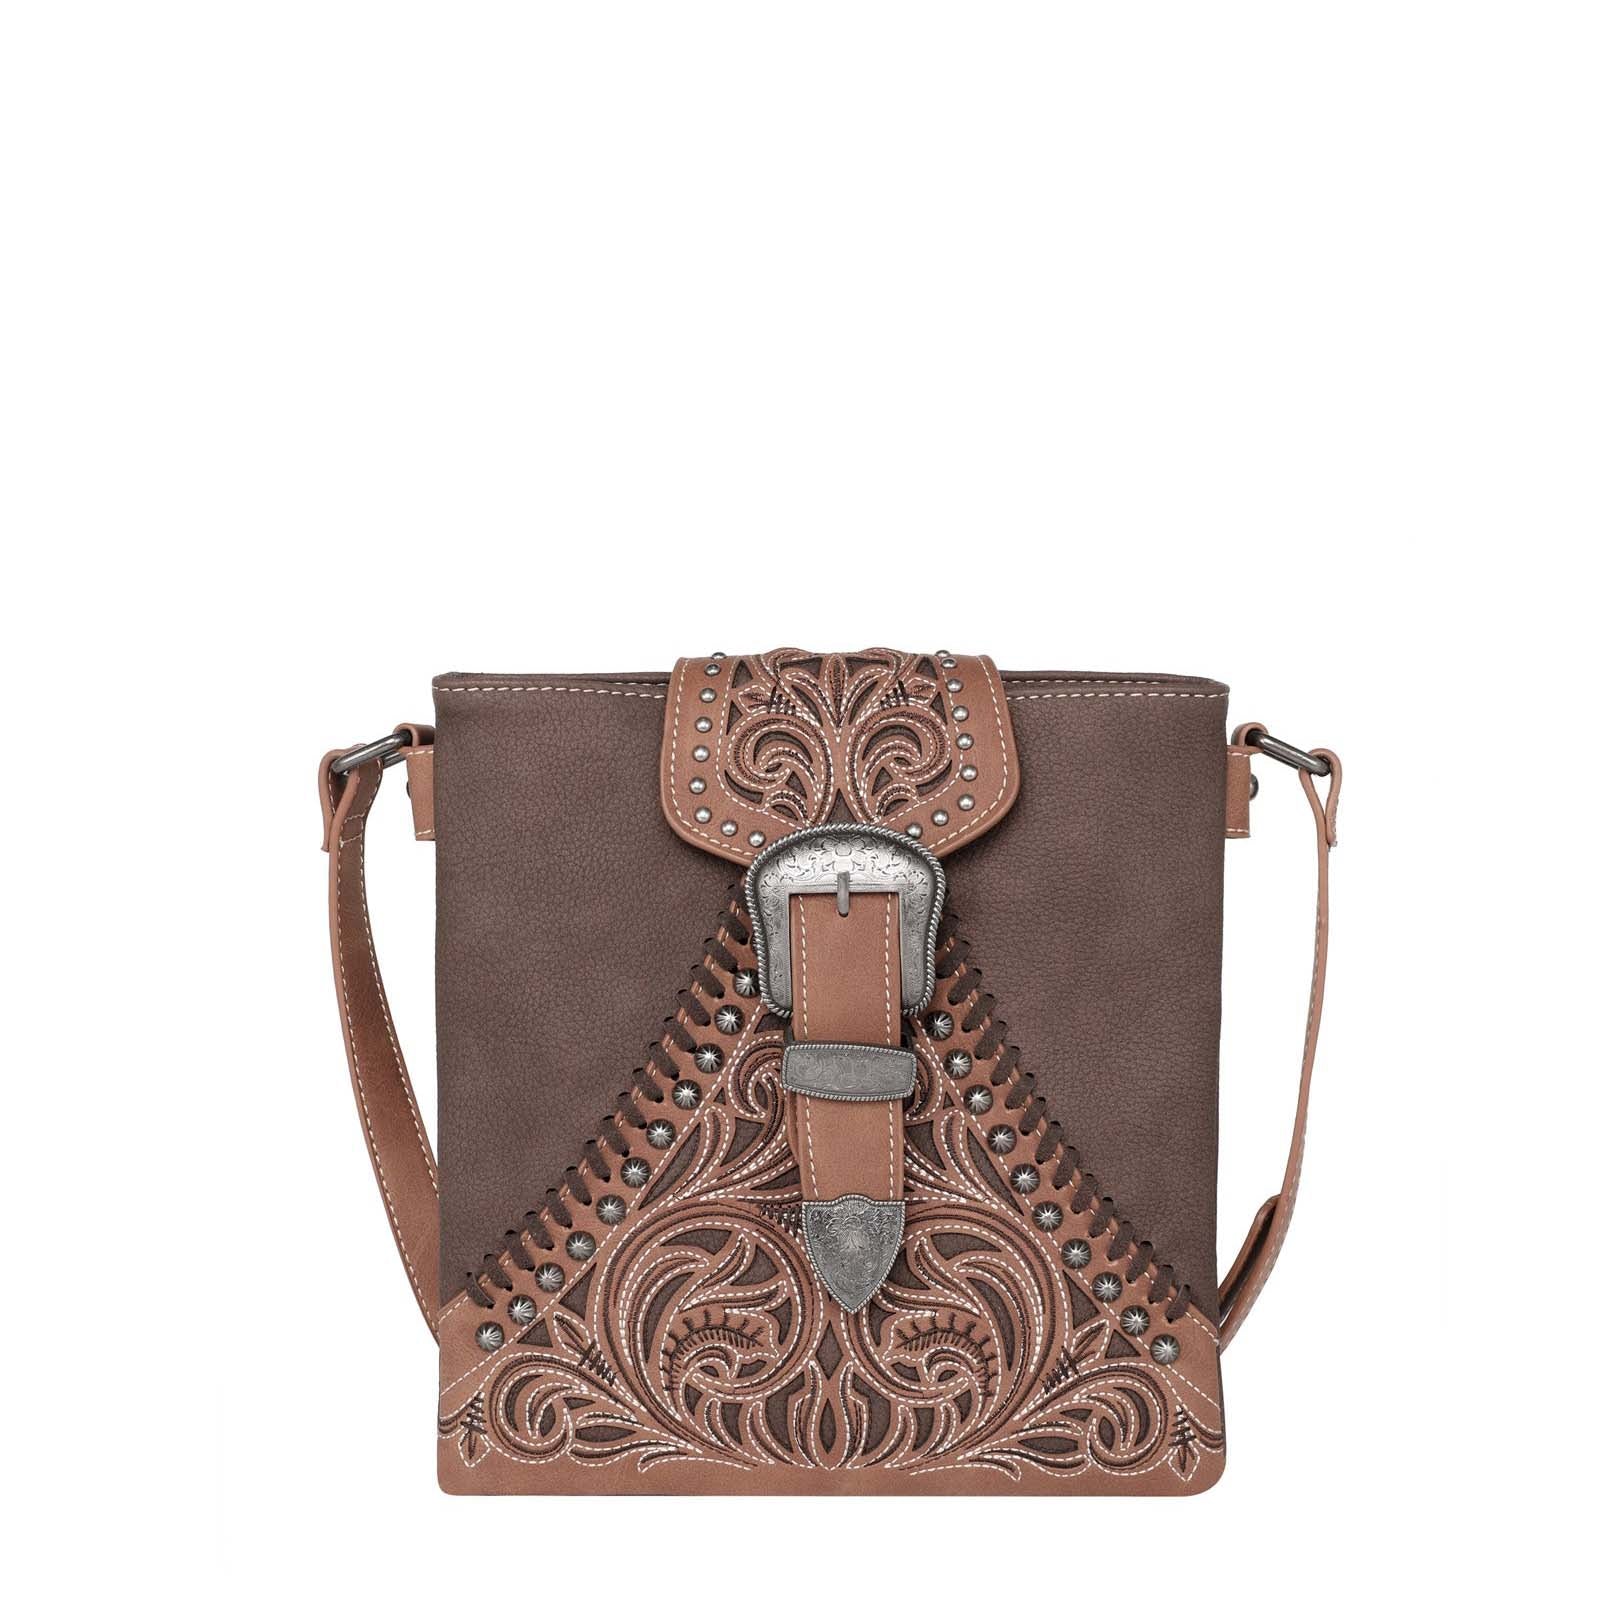 Montana West Floral Embroidered Buckle Collection Concealed Carry Crossbody